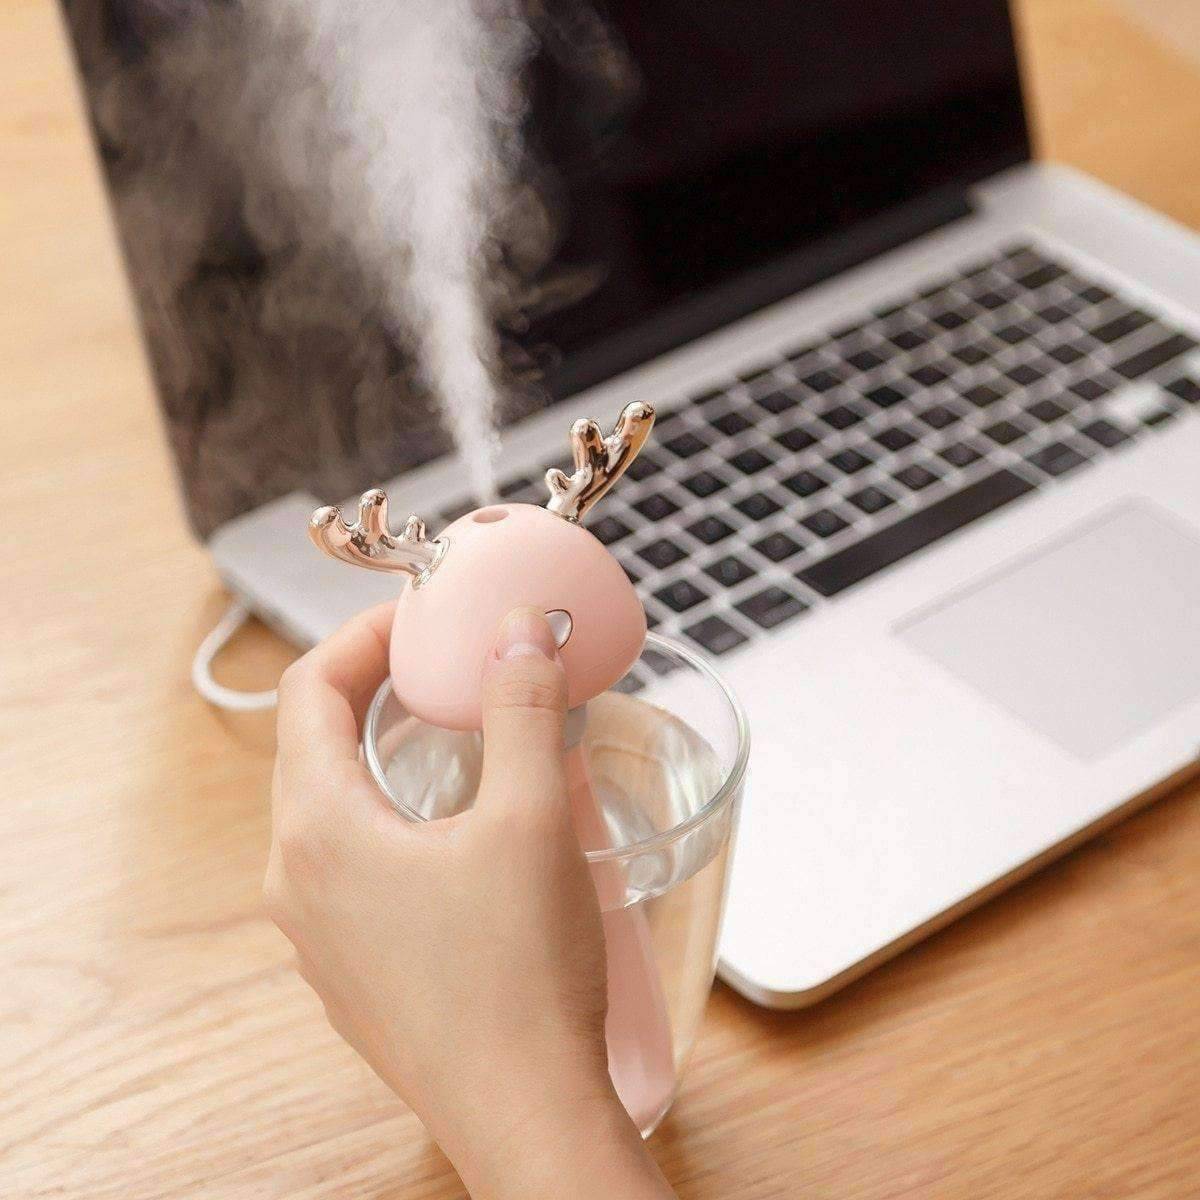 Pink Ava portable humidifier - beauty & wellness - Girl Pressing button on humidifier in front of laptop on wooden desk 